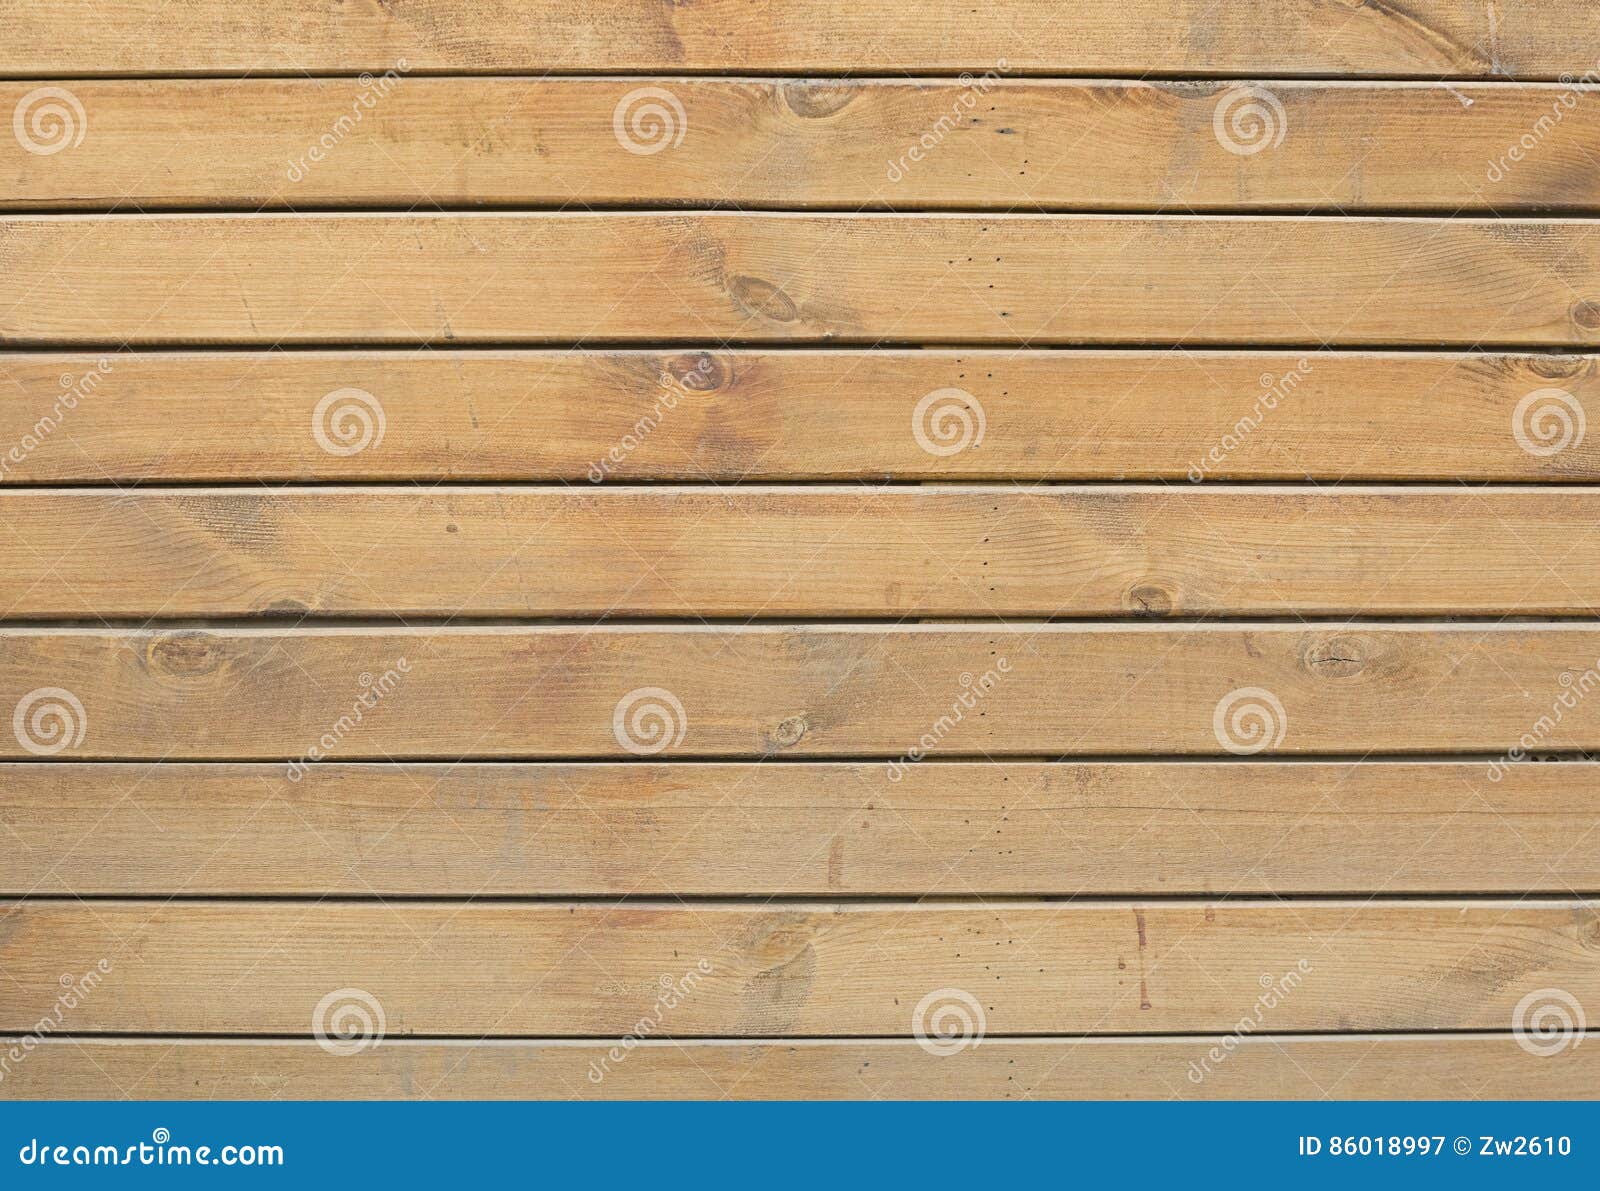 97,514 Wood Strips Images, Stock Photos, 3D objects, & Vectors